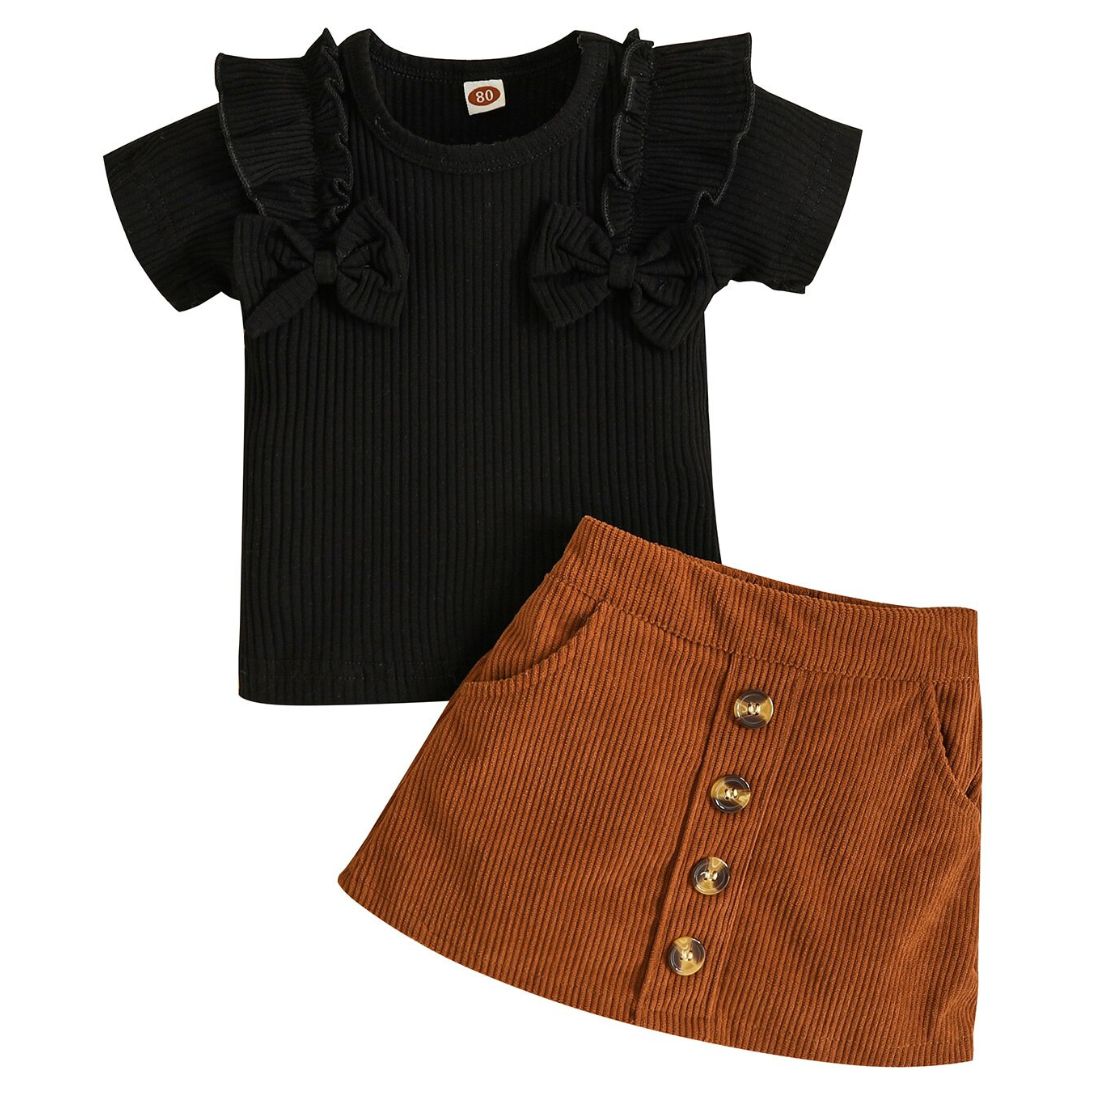 Black Ribbed Short Sleeve T-shirt with Bows and a brown A-line skirt Toddler Clothing Set